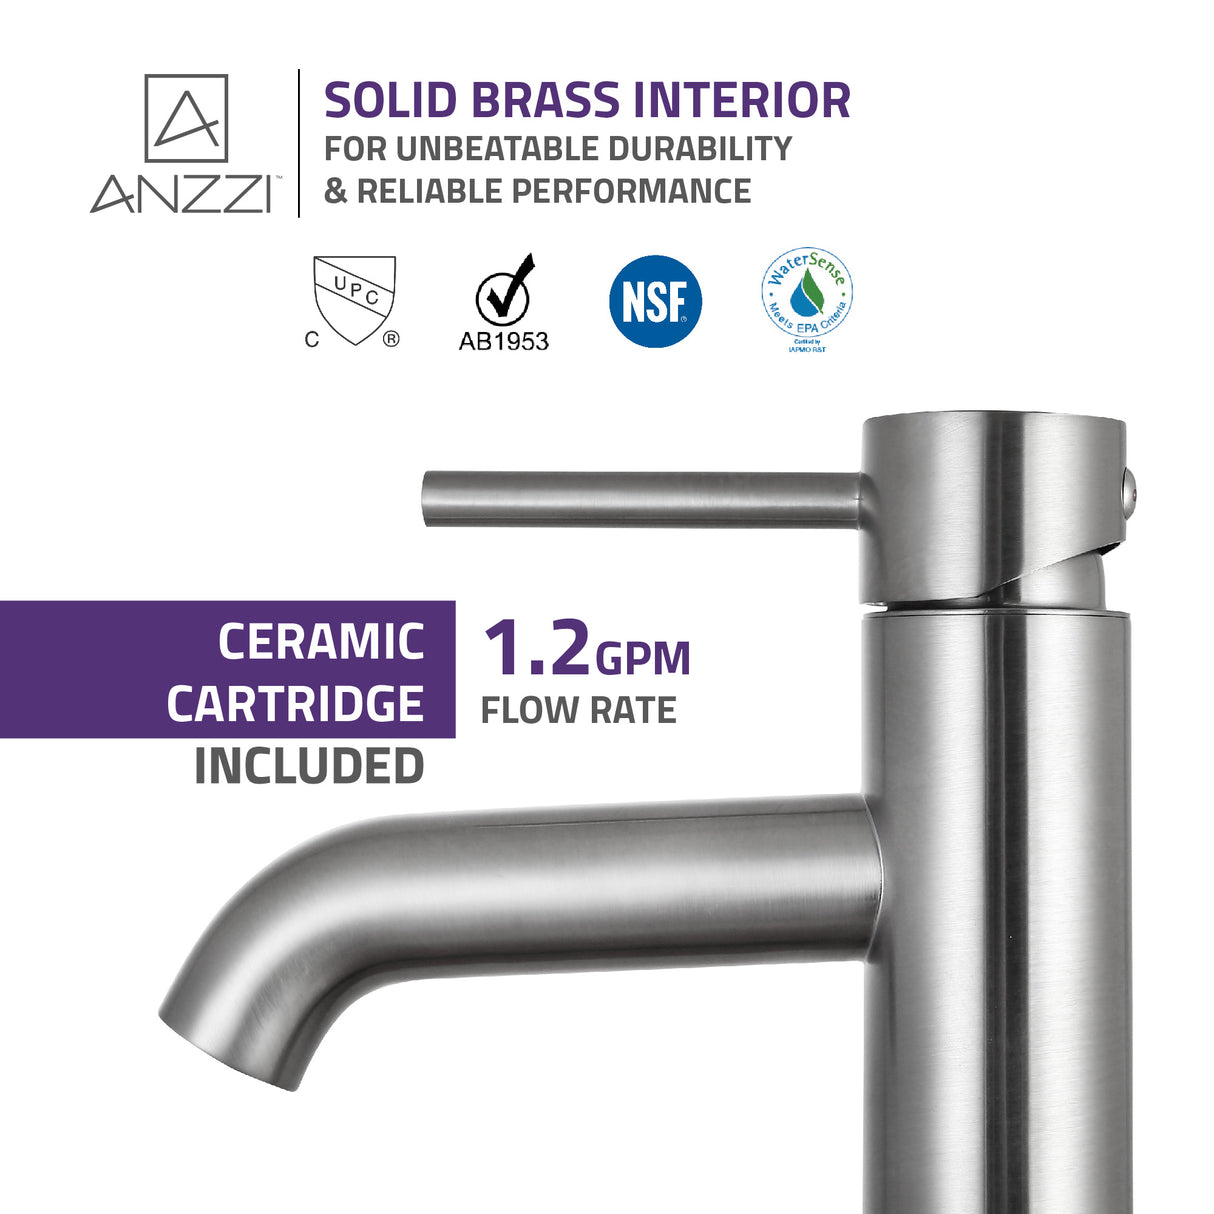 ANZZI L-AZ107BN Valle Single Hole Single Handle Bathroom Faucet in Brushed Nickel